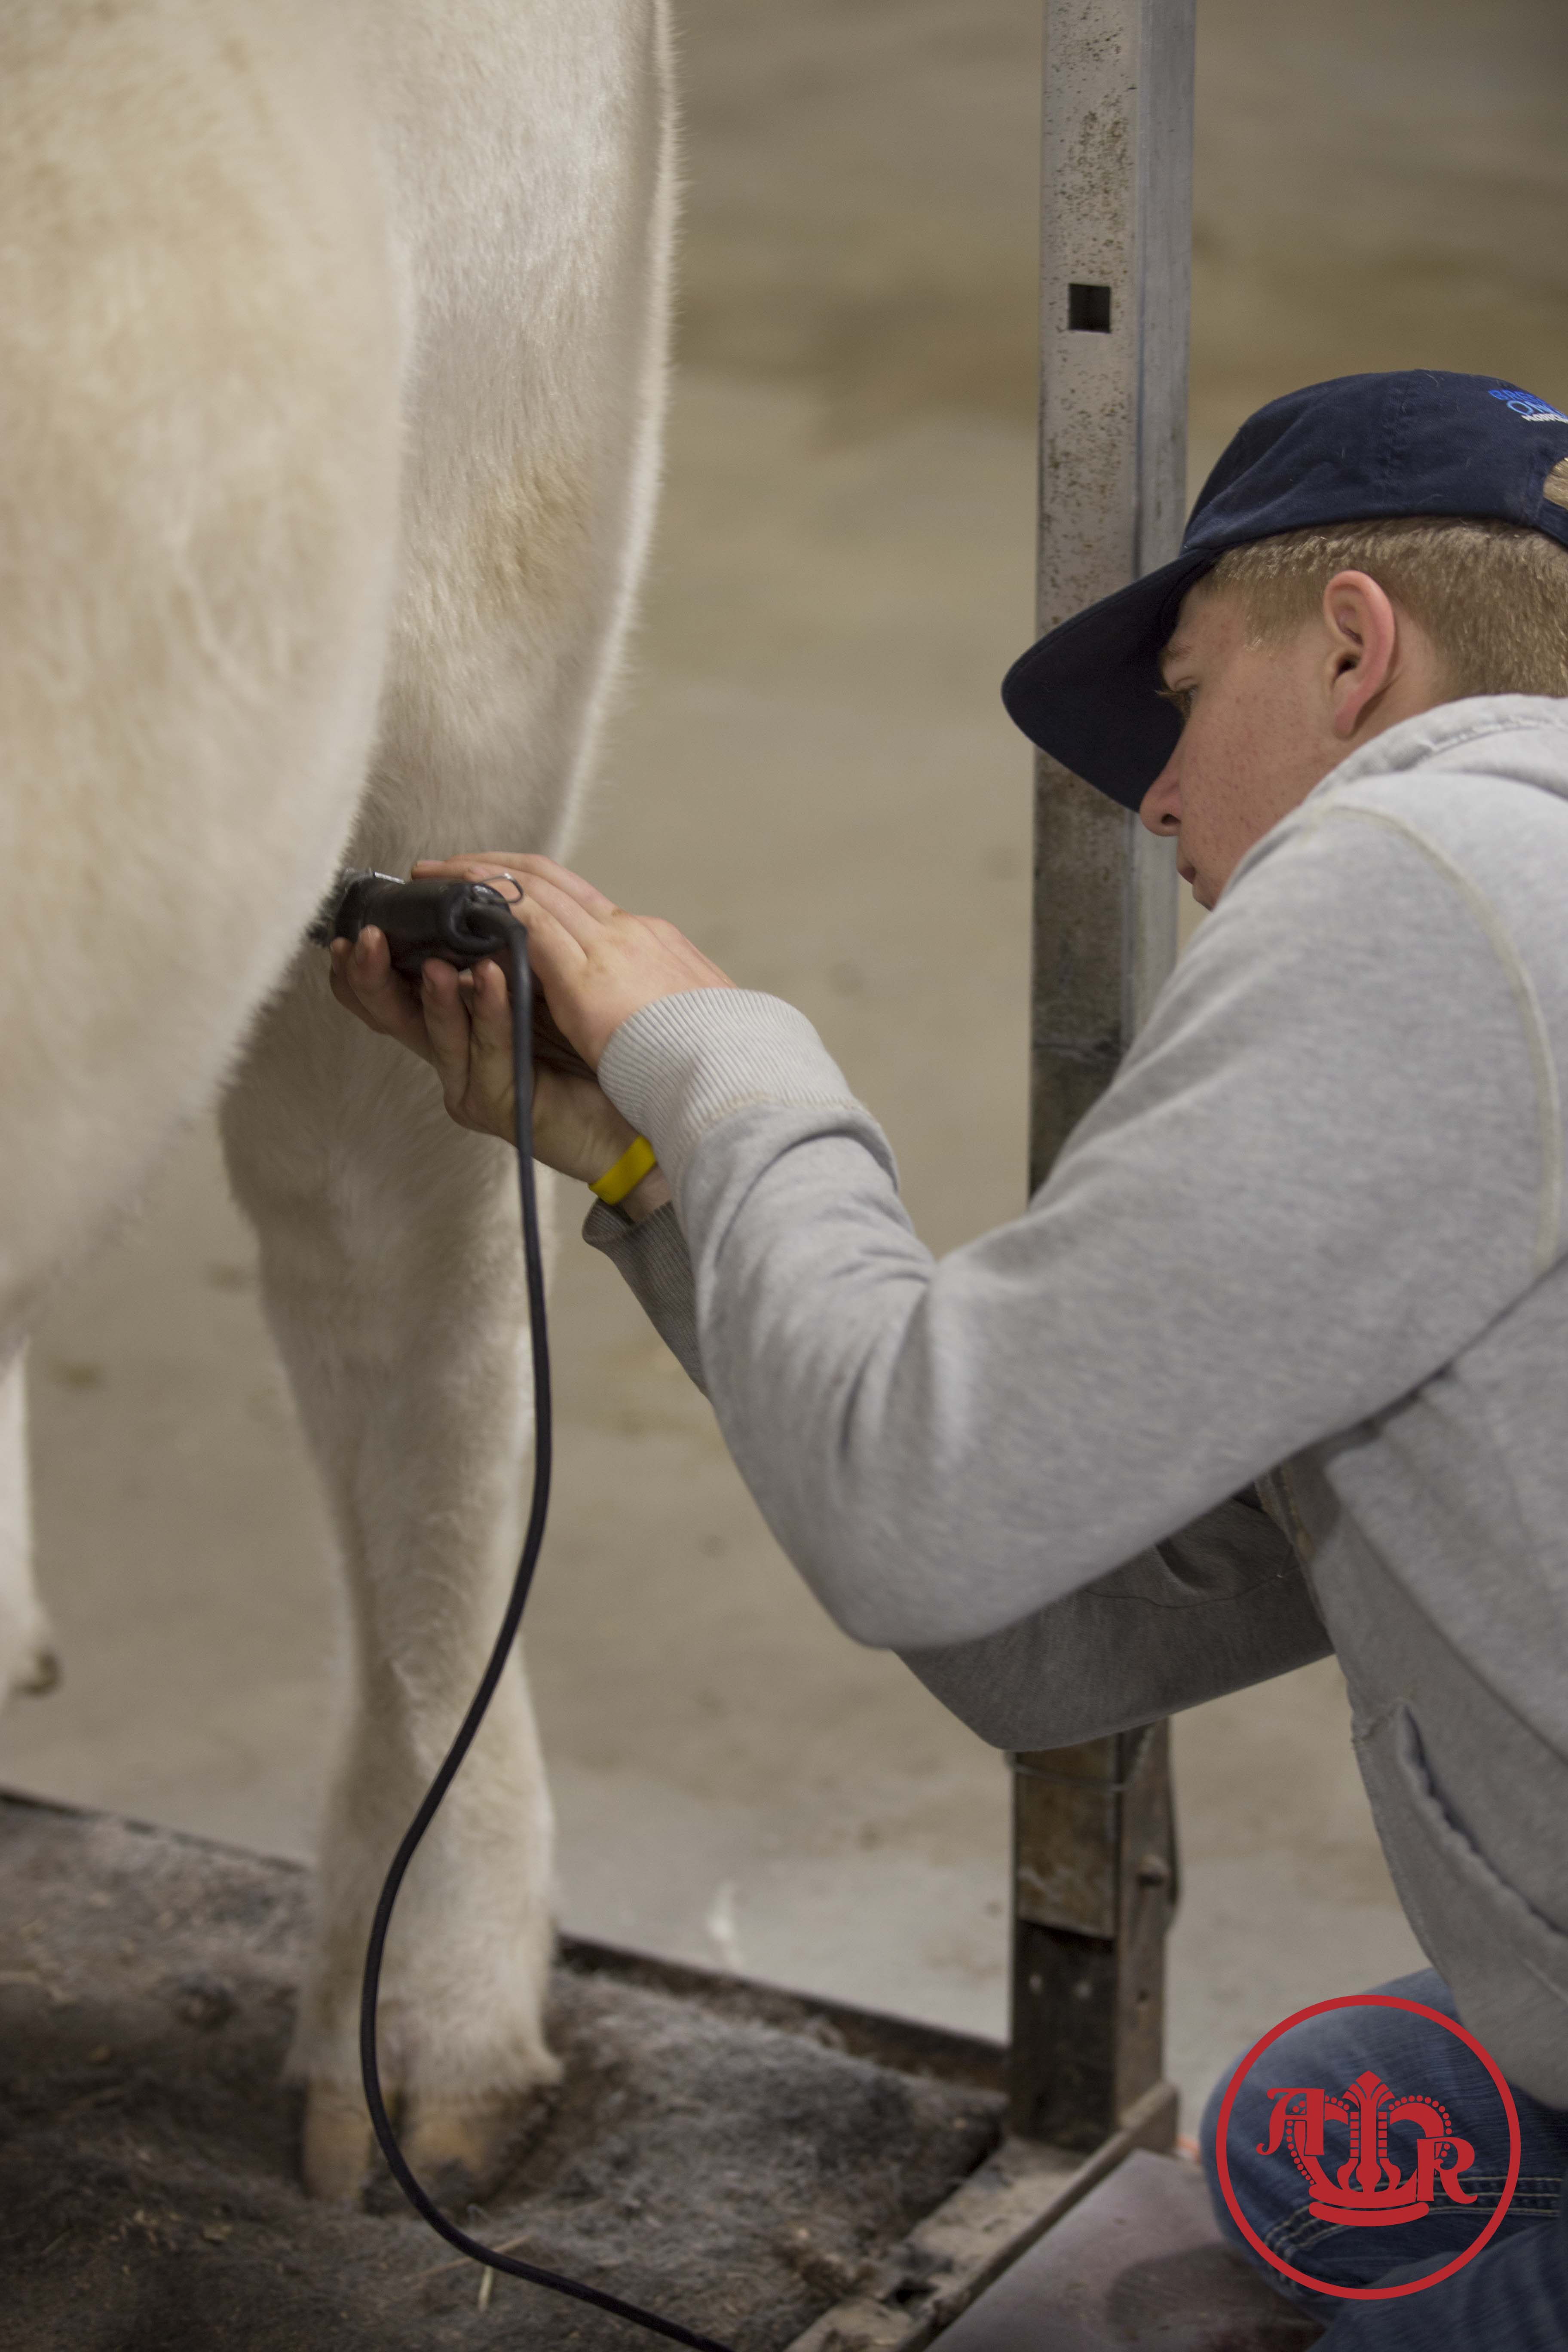 Fitting the Part – Junior Exhibitors Compete in Team Fitting